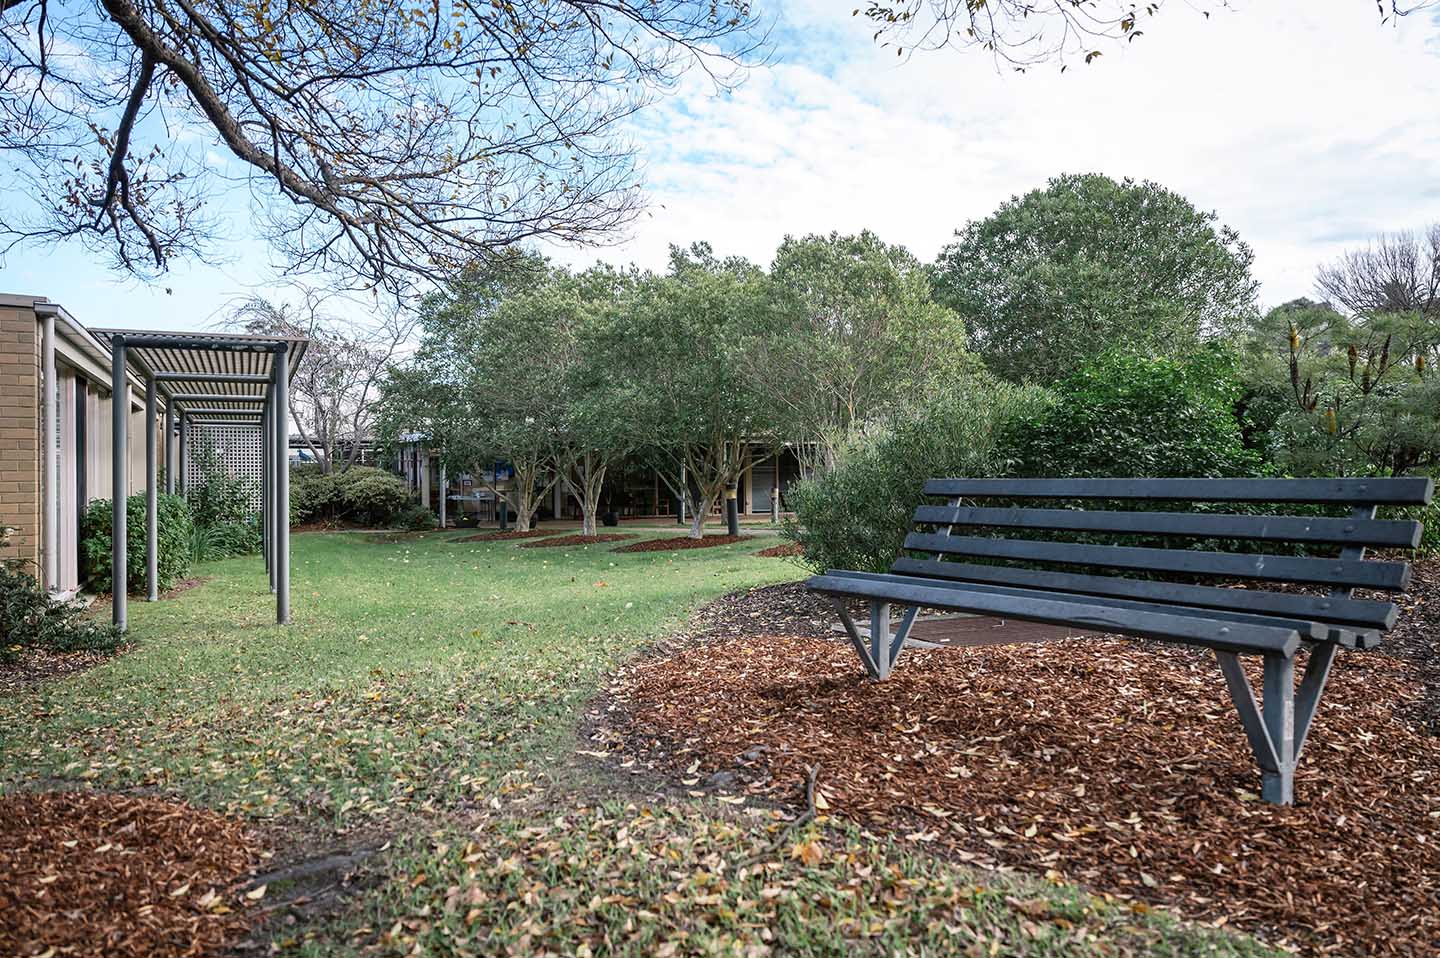 A black bench sits in the middle of a grassy area at a residential aged care facility.